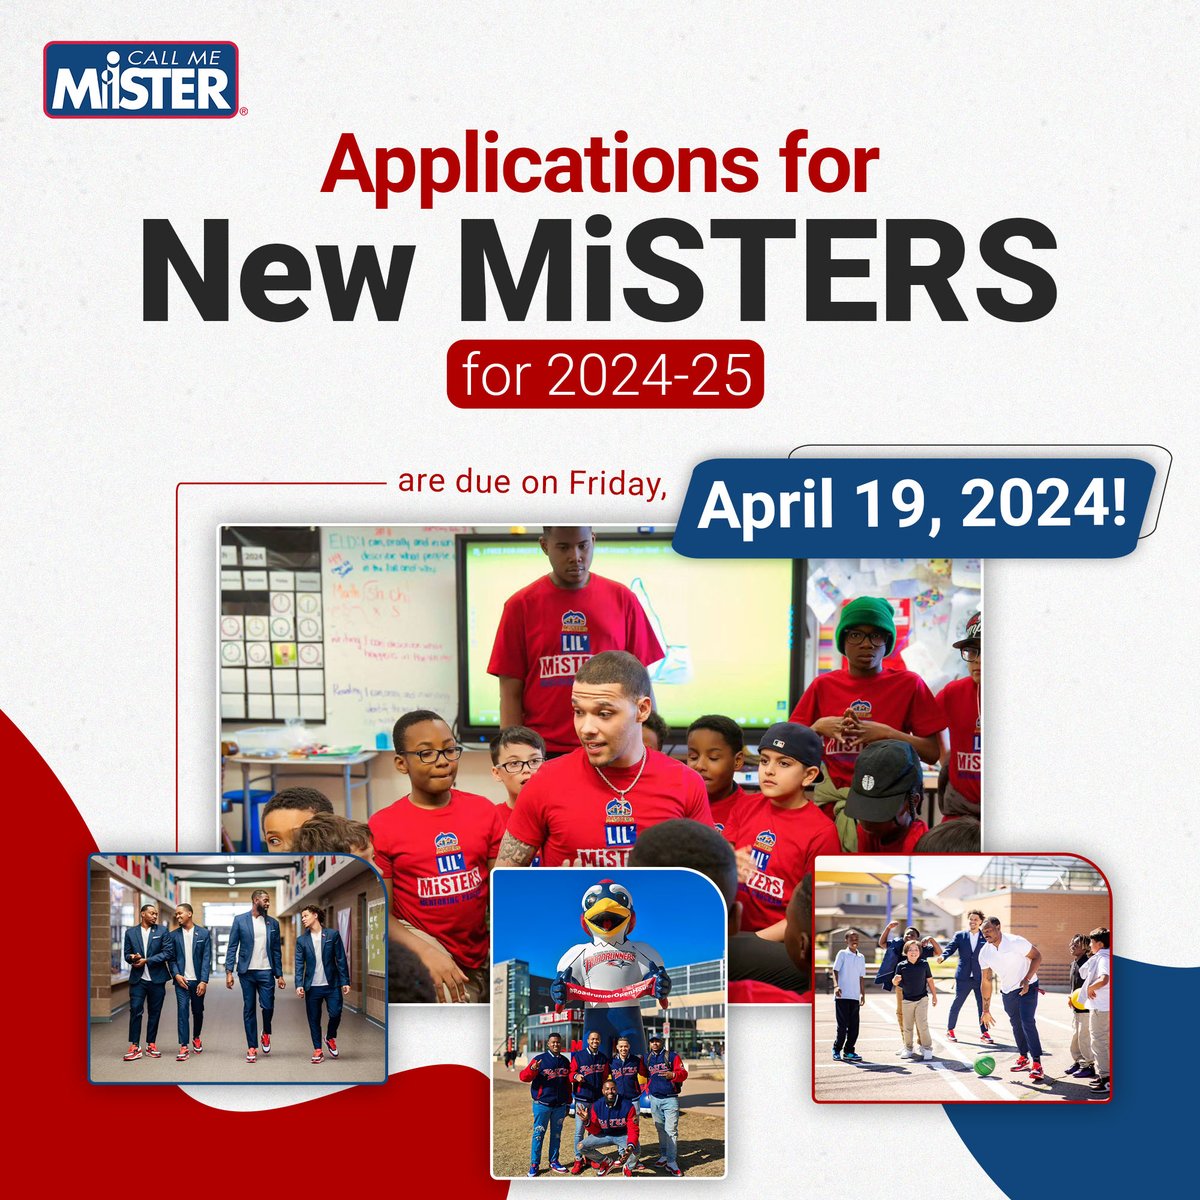 The Mile High MiSTERs of MSU Denver are currently recruiting for the upcoming class of MiSTERs for the nationally acclaimed Call Me MiSTER Program, a teacher leadership program that recruits, trains, & places Black male educators. msudenver.edu/education/call… Here are the top 8